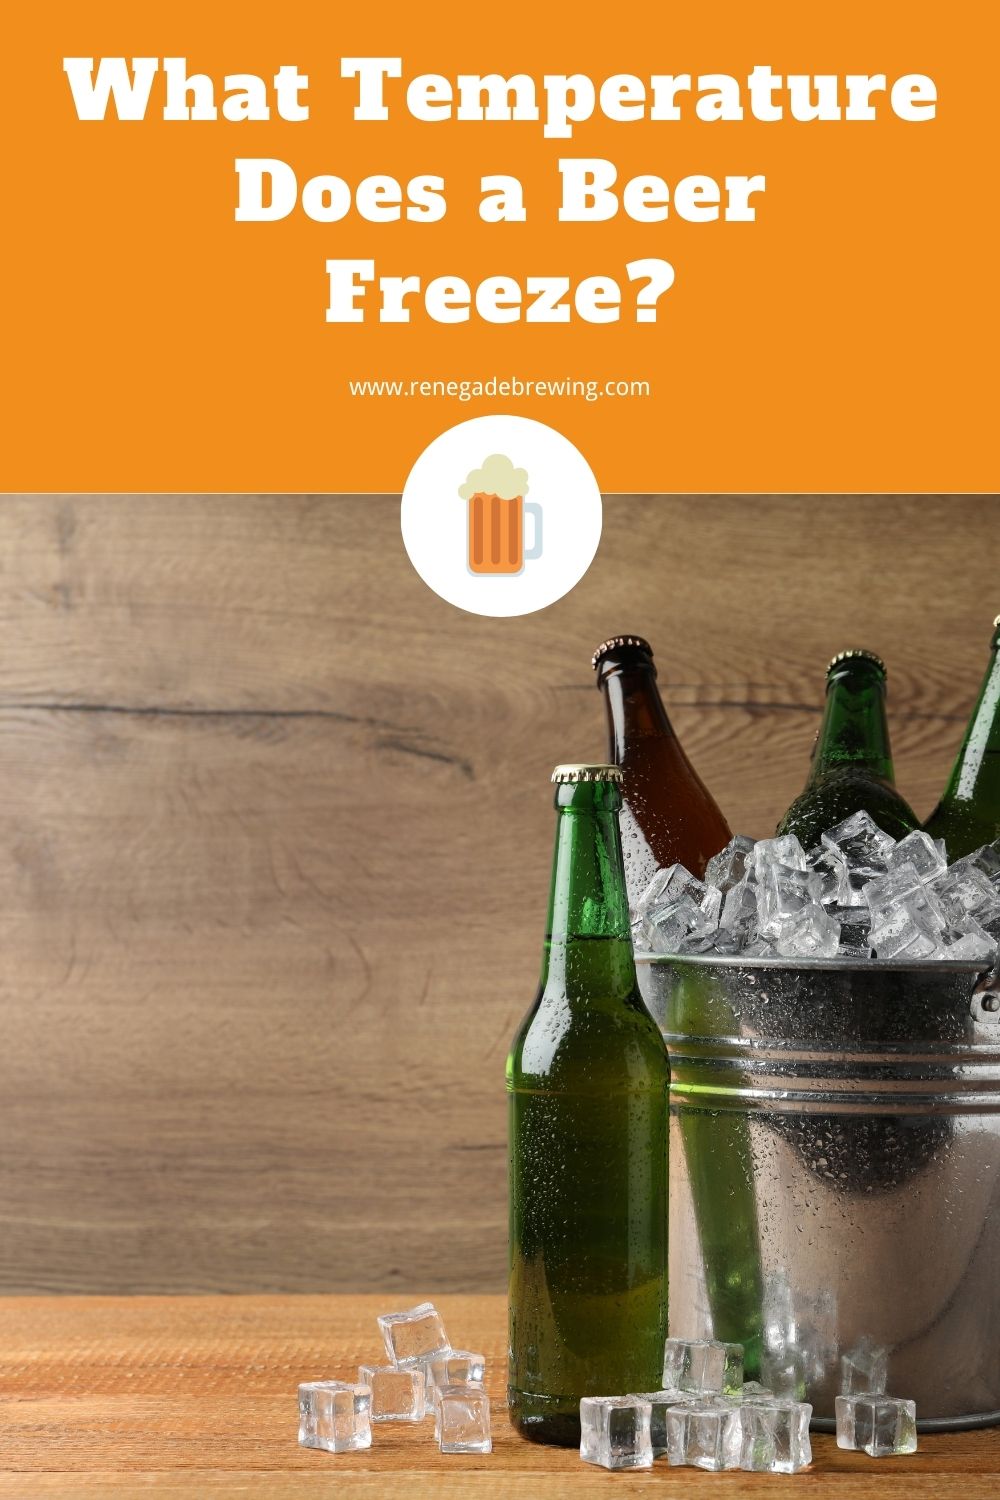 What Temperature Does a Beer Freeze? At What Temperature Does Beer Freeze